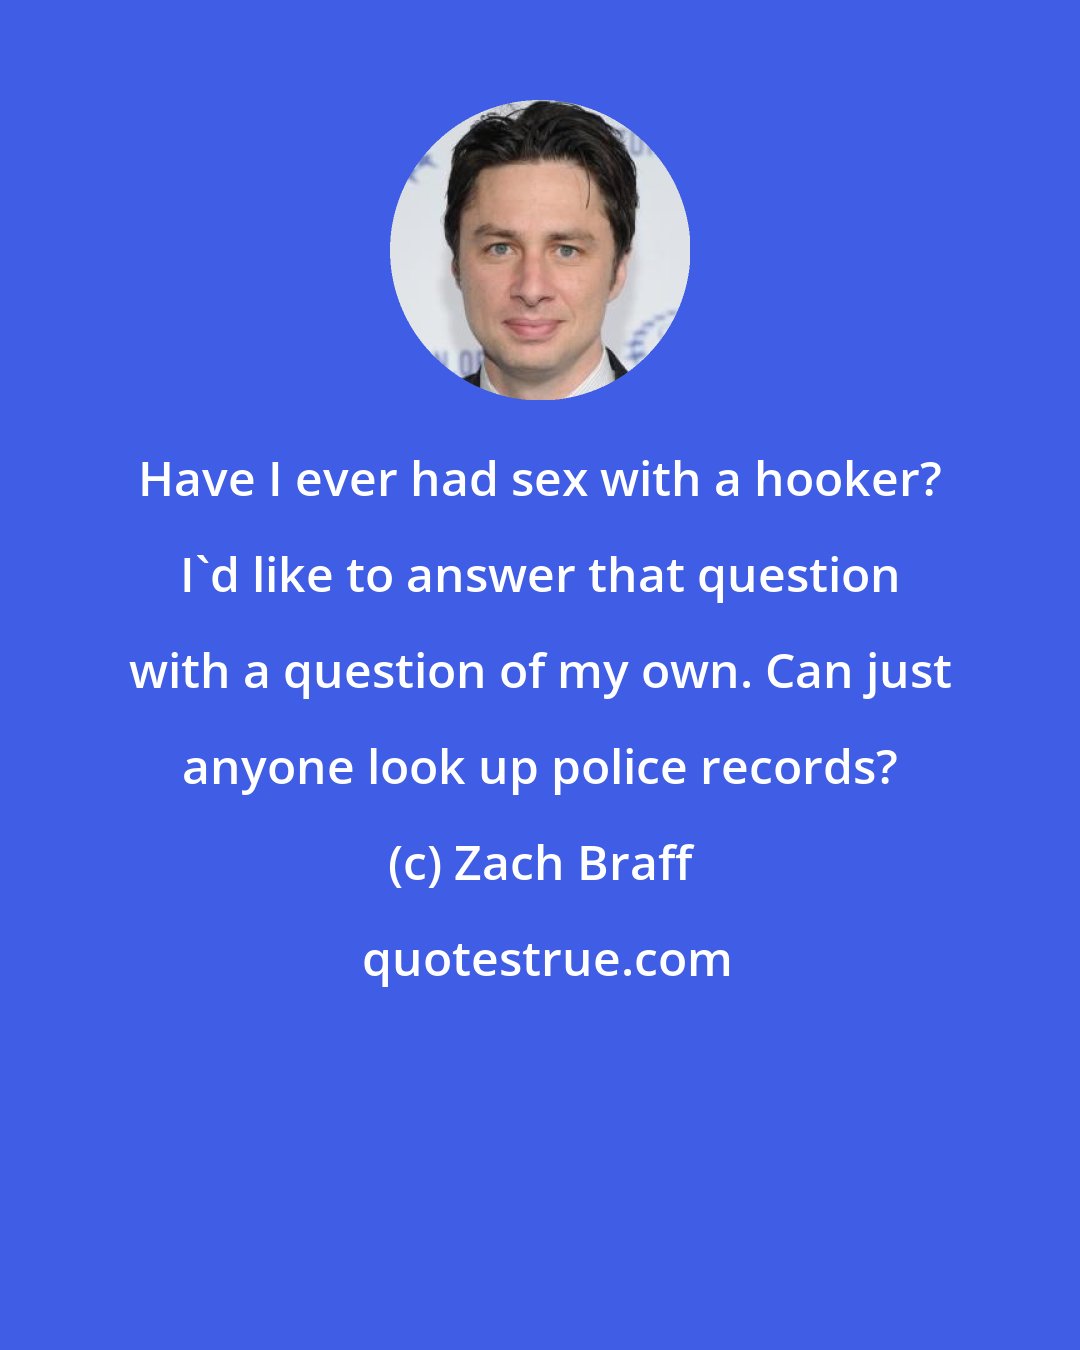 Zach Braff: Have I ever had sex with a hooker? I'd like to answer that question with a question of my own. Can just anyone look up police records?